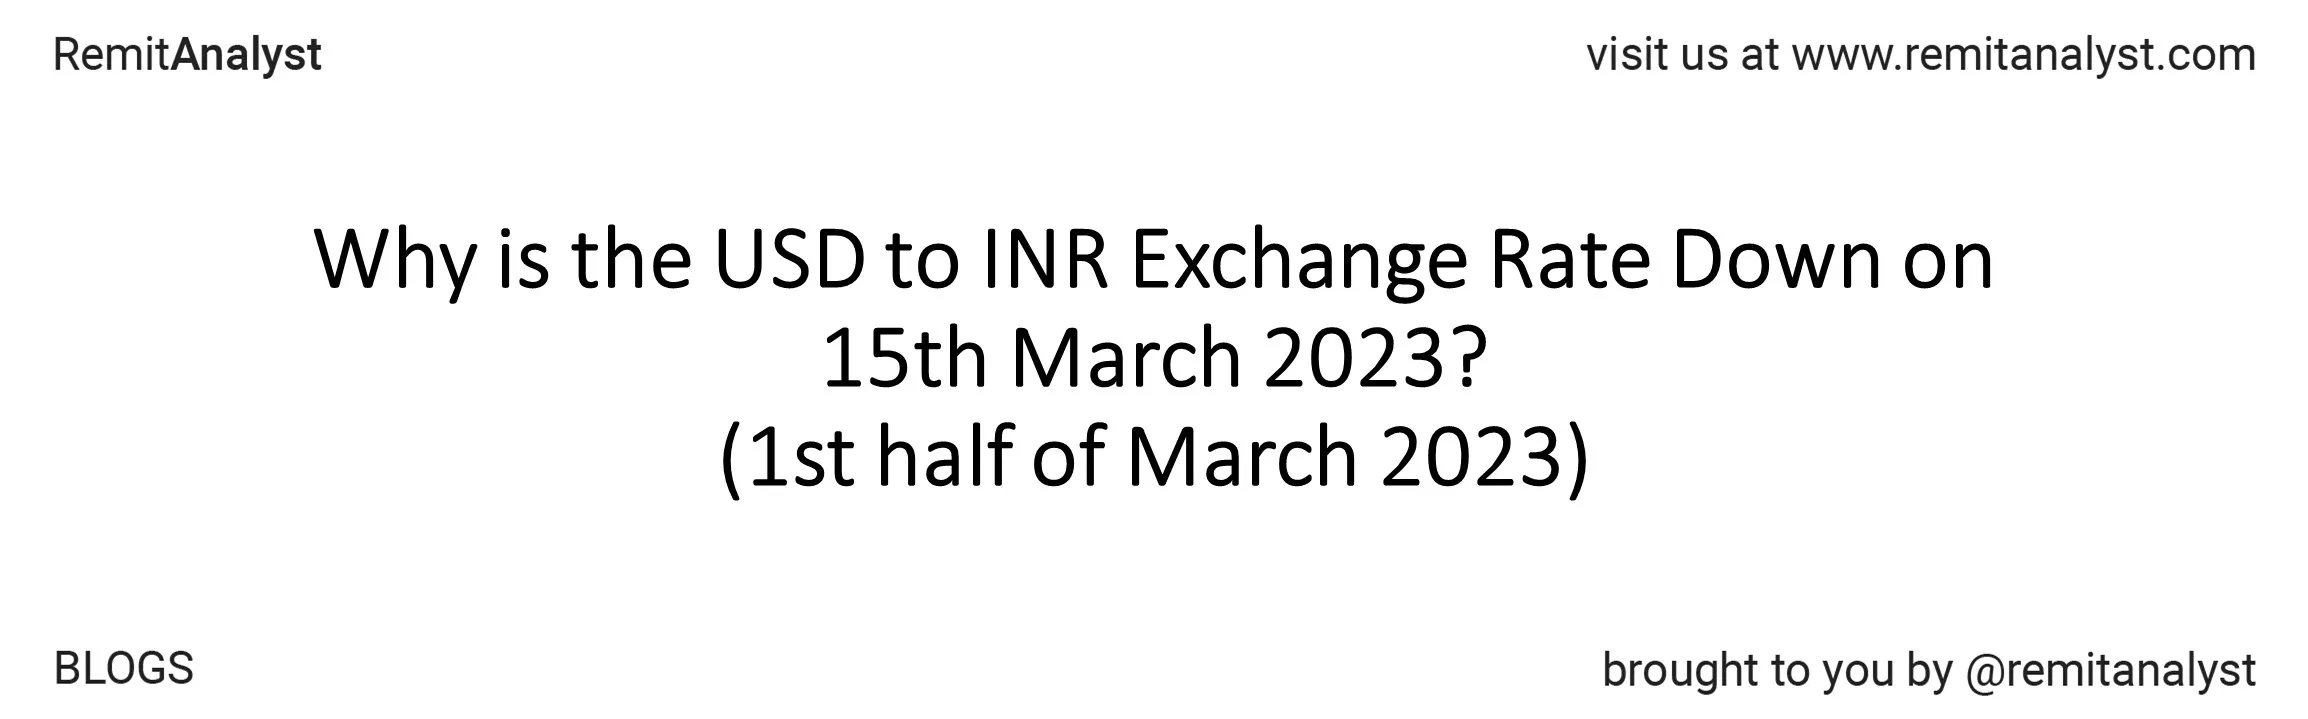 Usd To Inr Exchange Rate 1 Mar 2023 To 15 Mar 2023 Title 